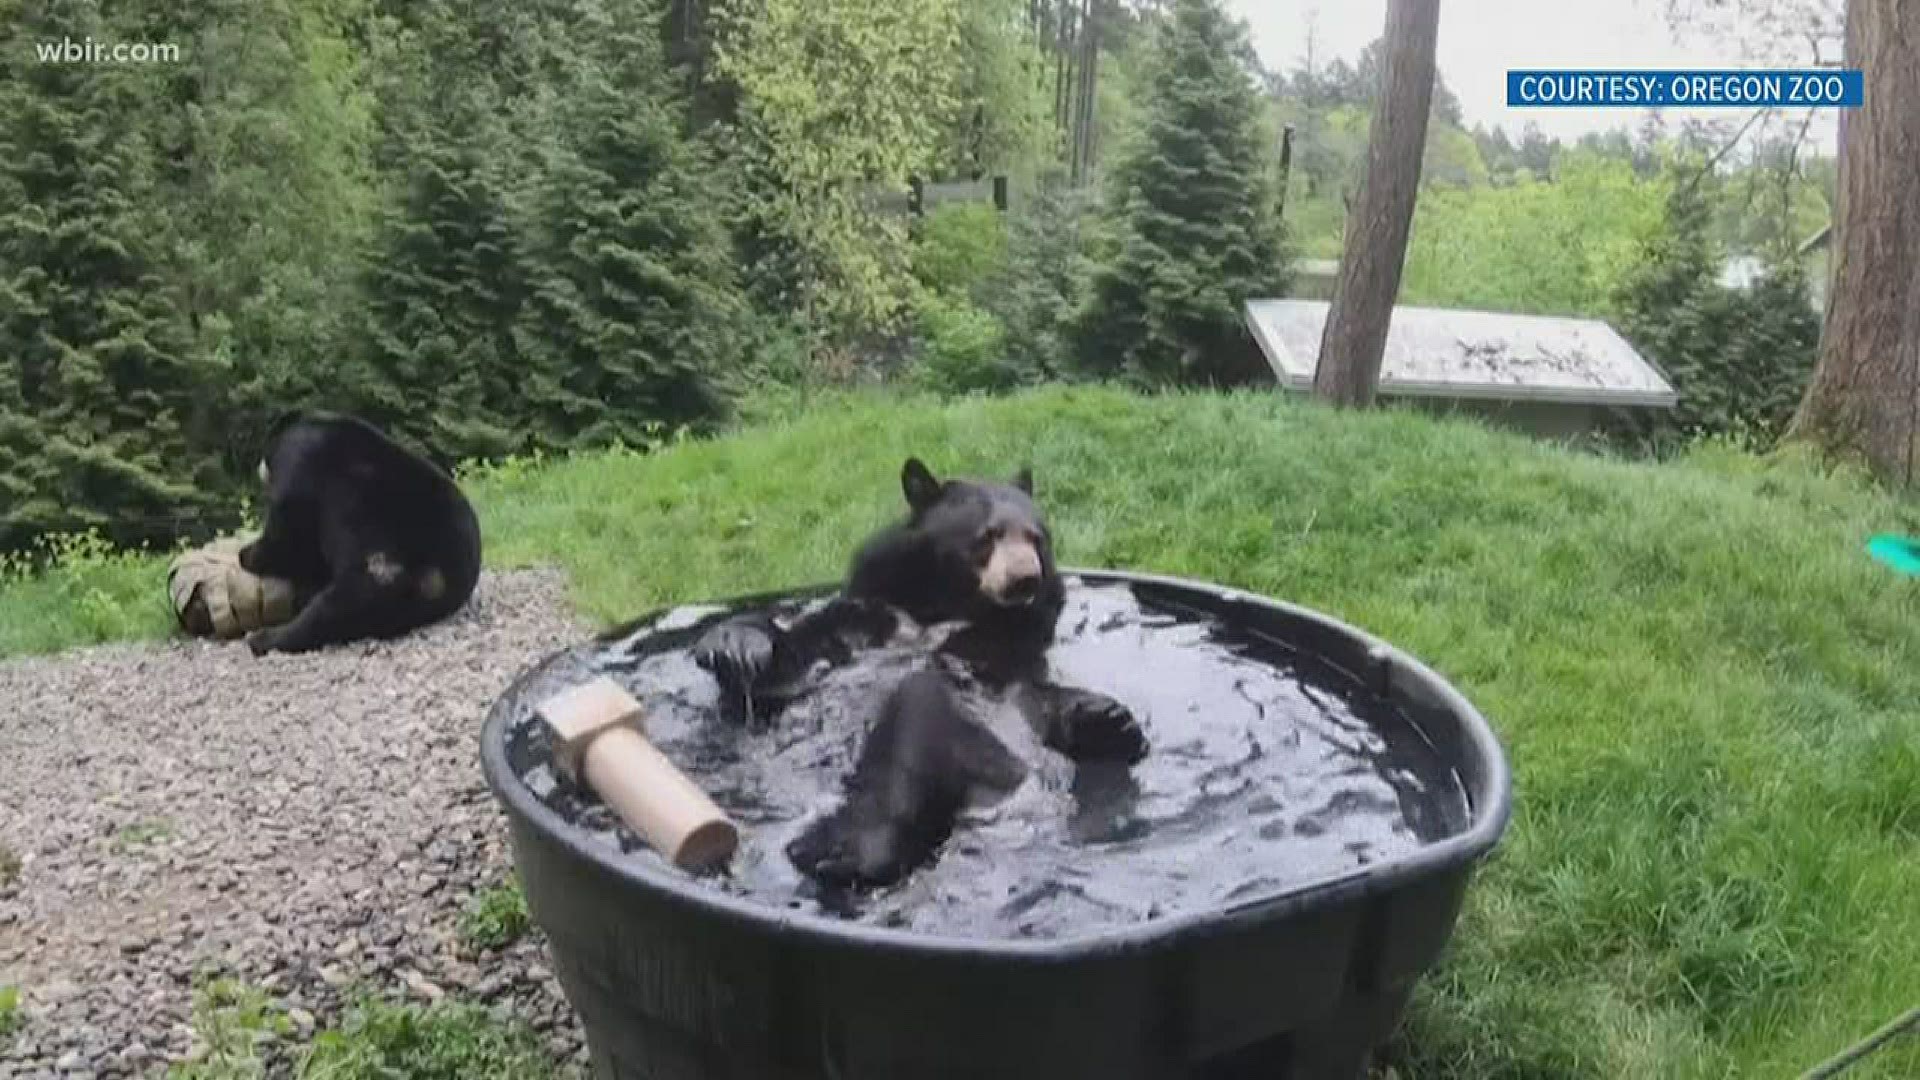 A bear taking a bit of a break from the heat in the Northwest.